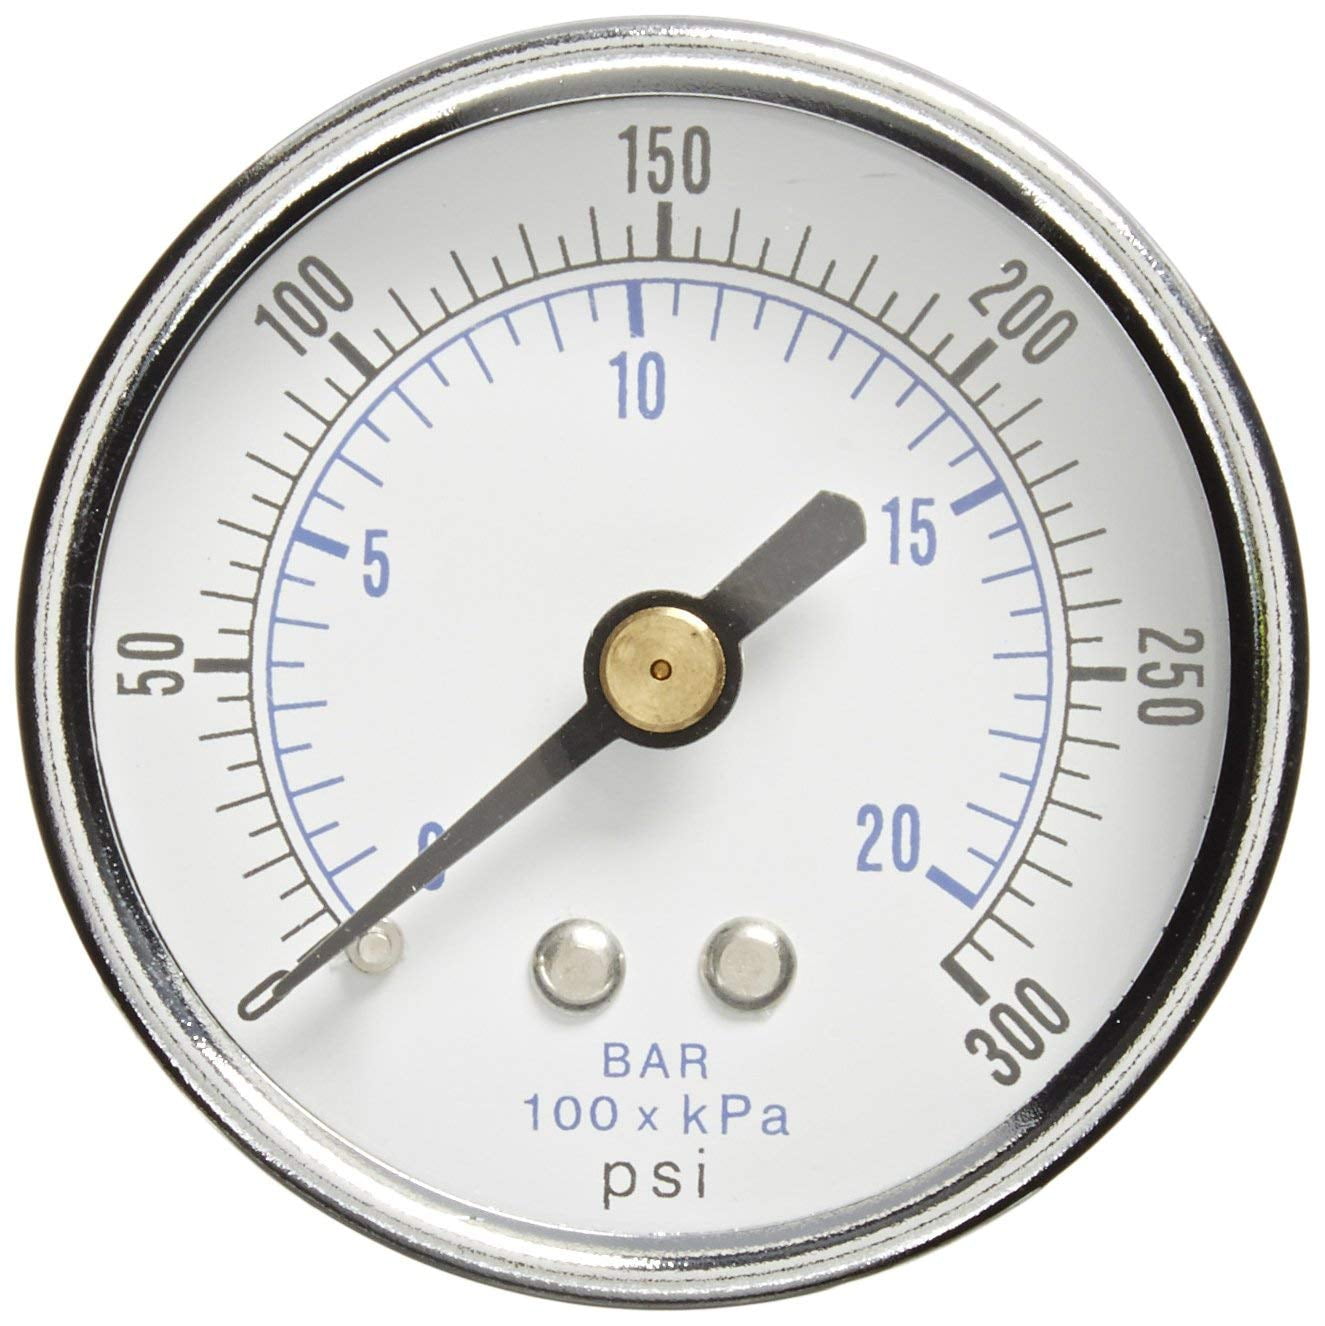 1/4" NPT Air Pressure Gauge 0-100 PSI Bootom Mount 2.0" Face FREE SHIPPING 